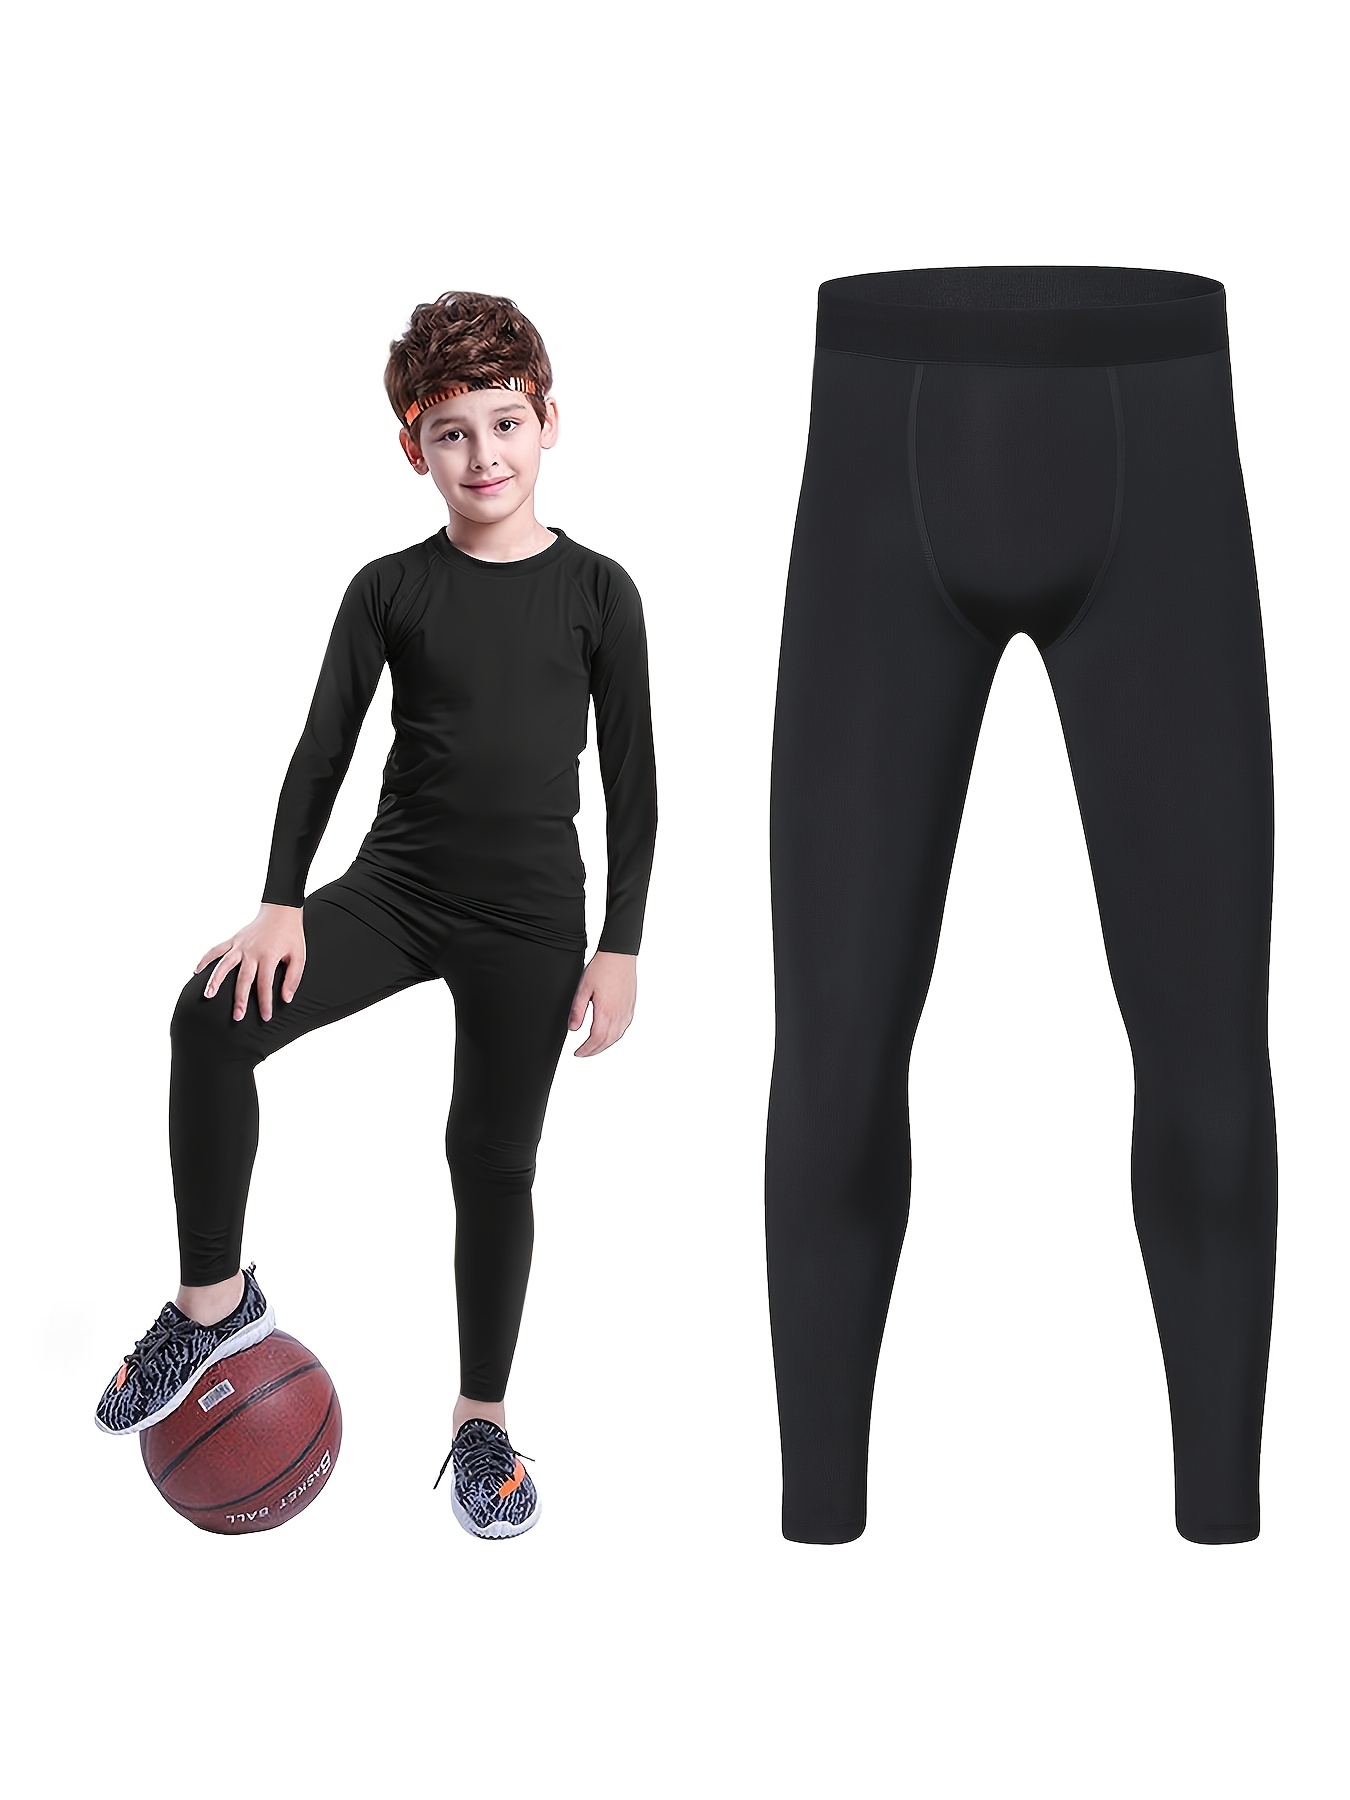 Boys&Girls Thermal Pants Baselayer Leggings Warm Tights Fleece-Lined  Compression Pants Kids Youth 